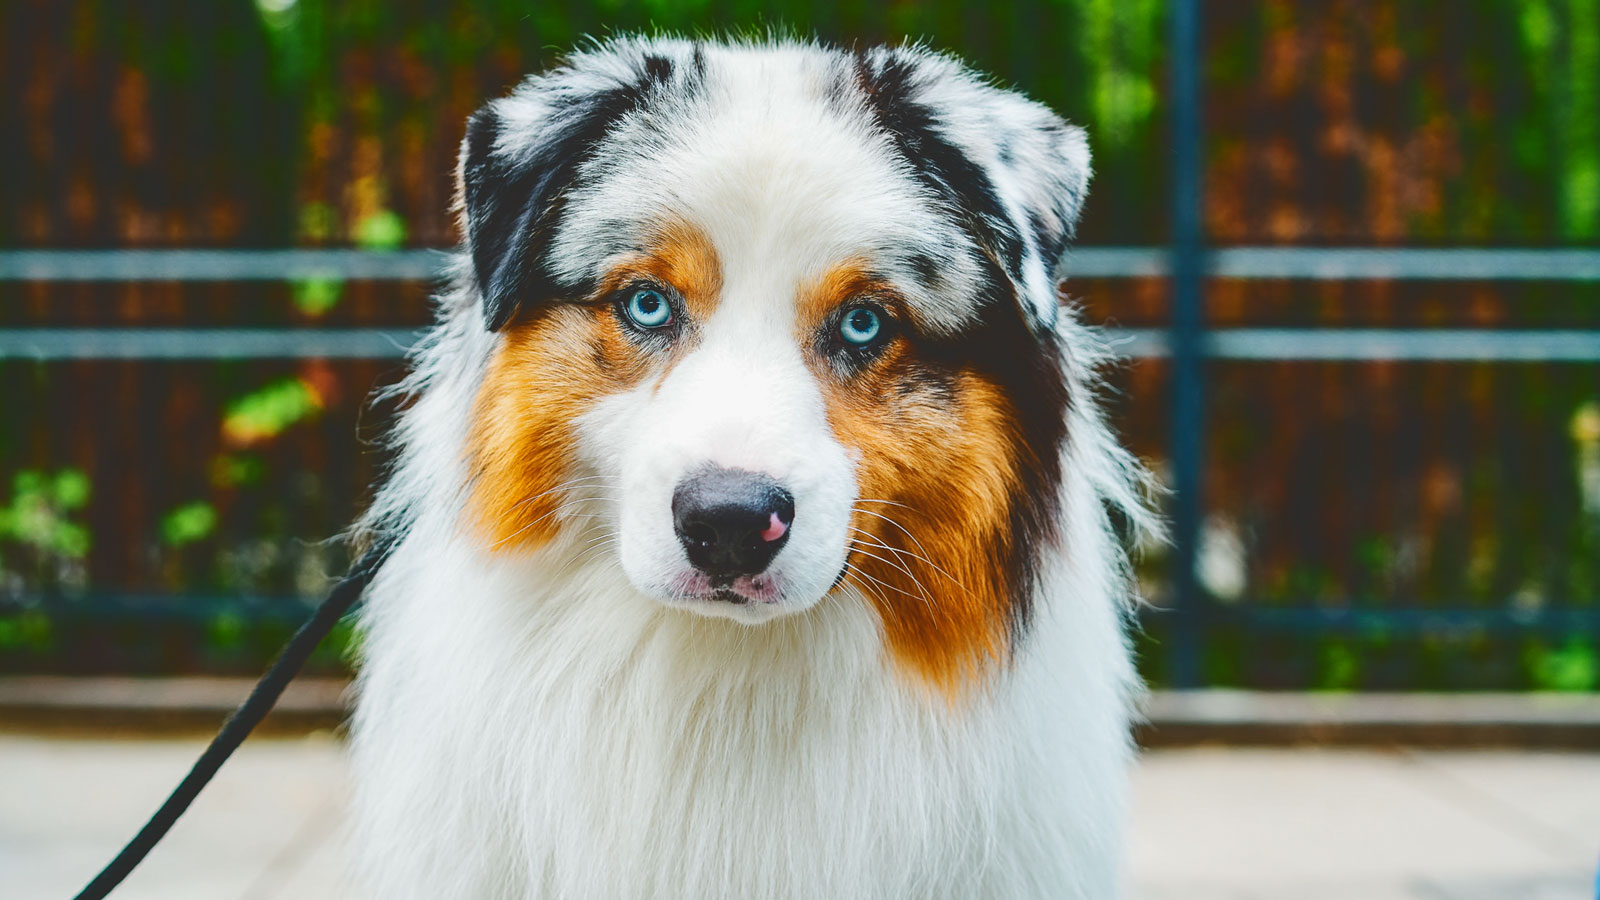 A dog with brown, black, and white fur and bright blue eyes